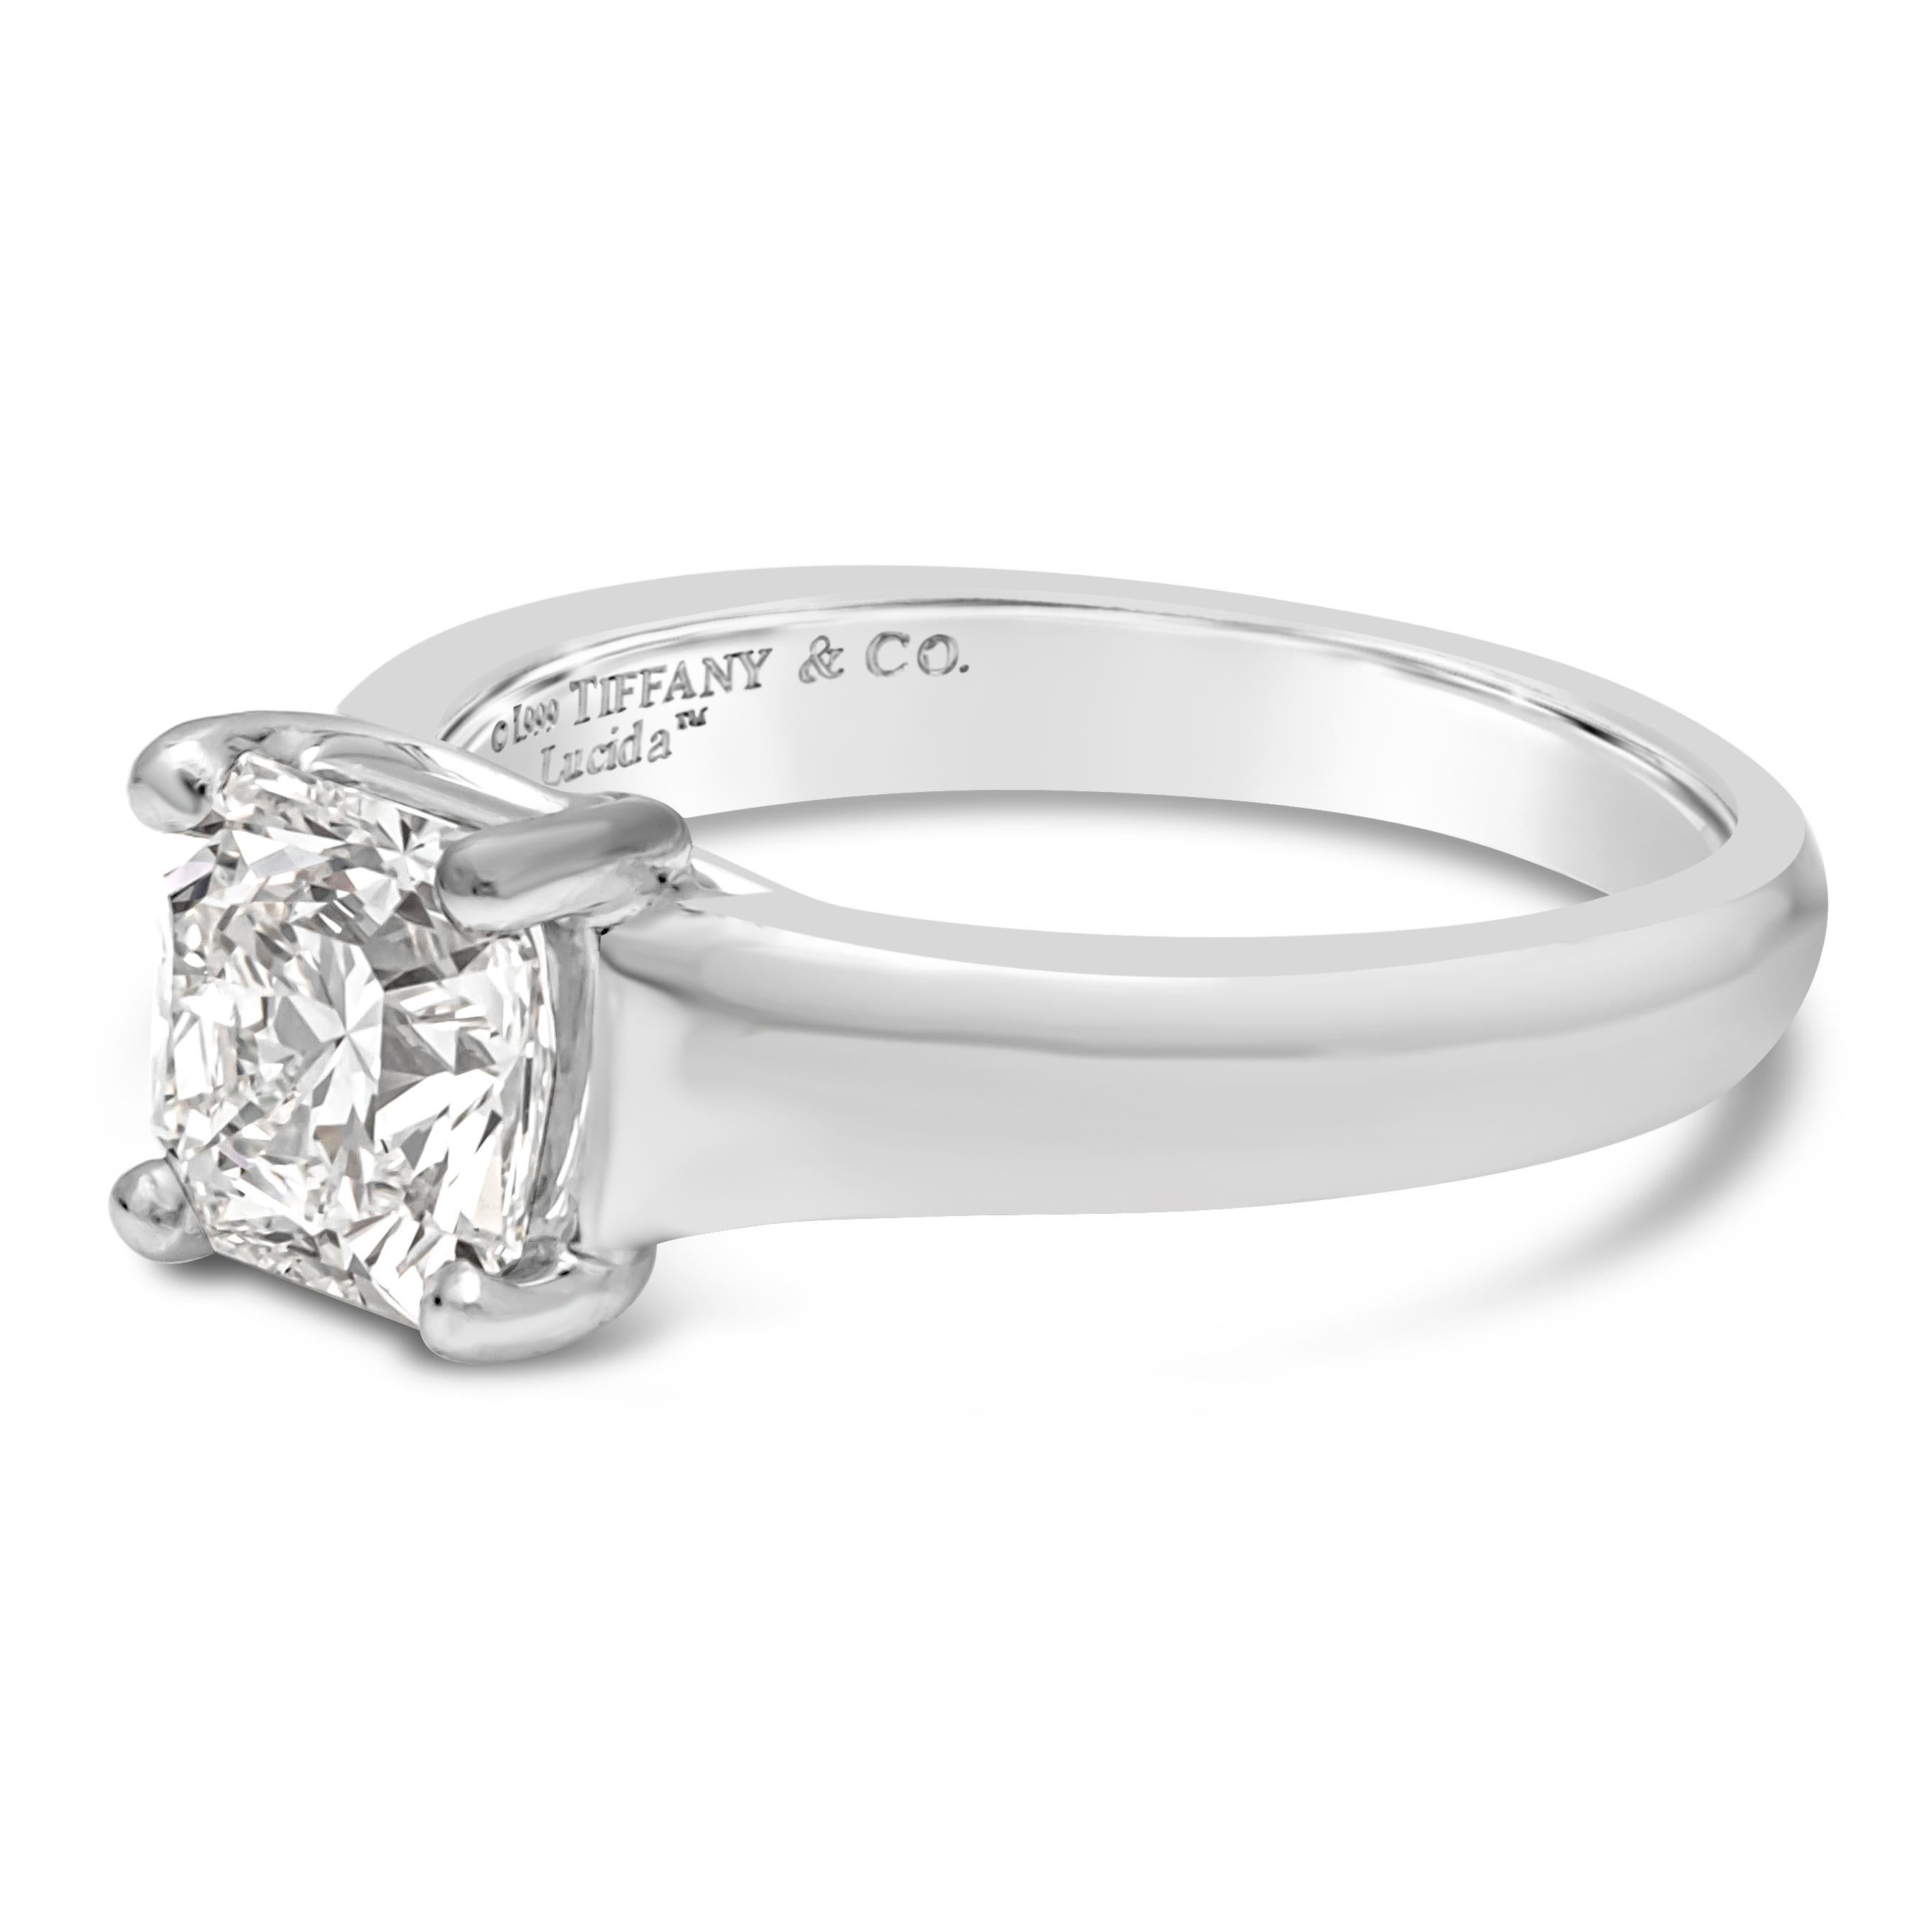 A timeless solitaire engagement ring style showcasing a 1.08 carats radiant cut diamond certified by GIA as F Color and VVS2 in Clarity, set in a classic four prong basket setting, Finely made in a platinum and Size 3.75 US resizable upon